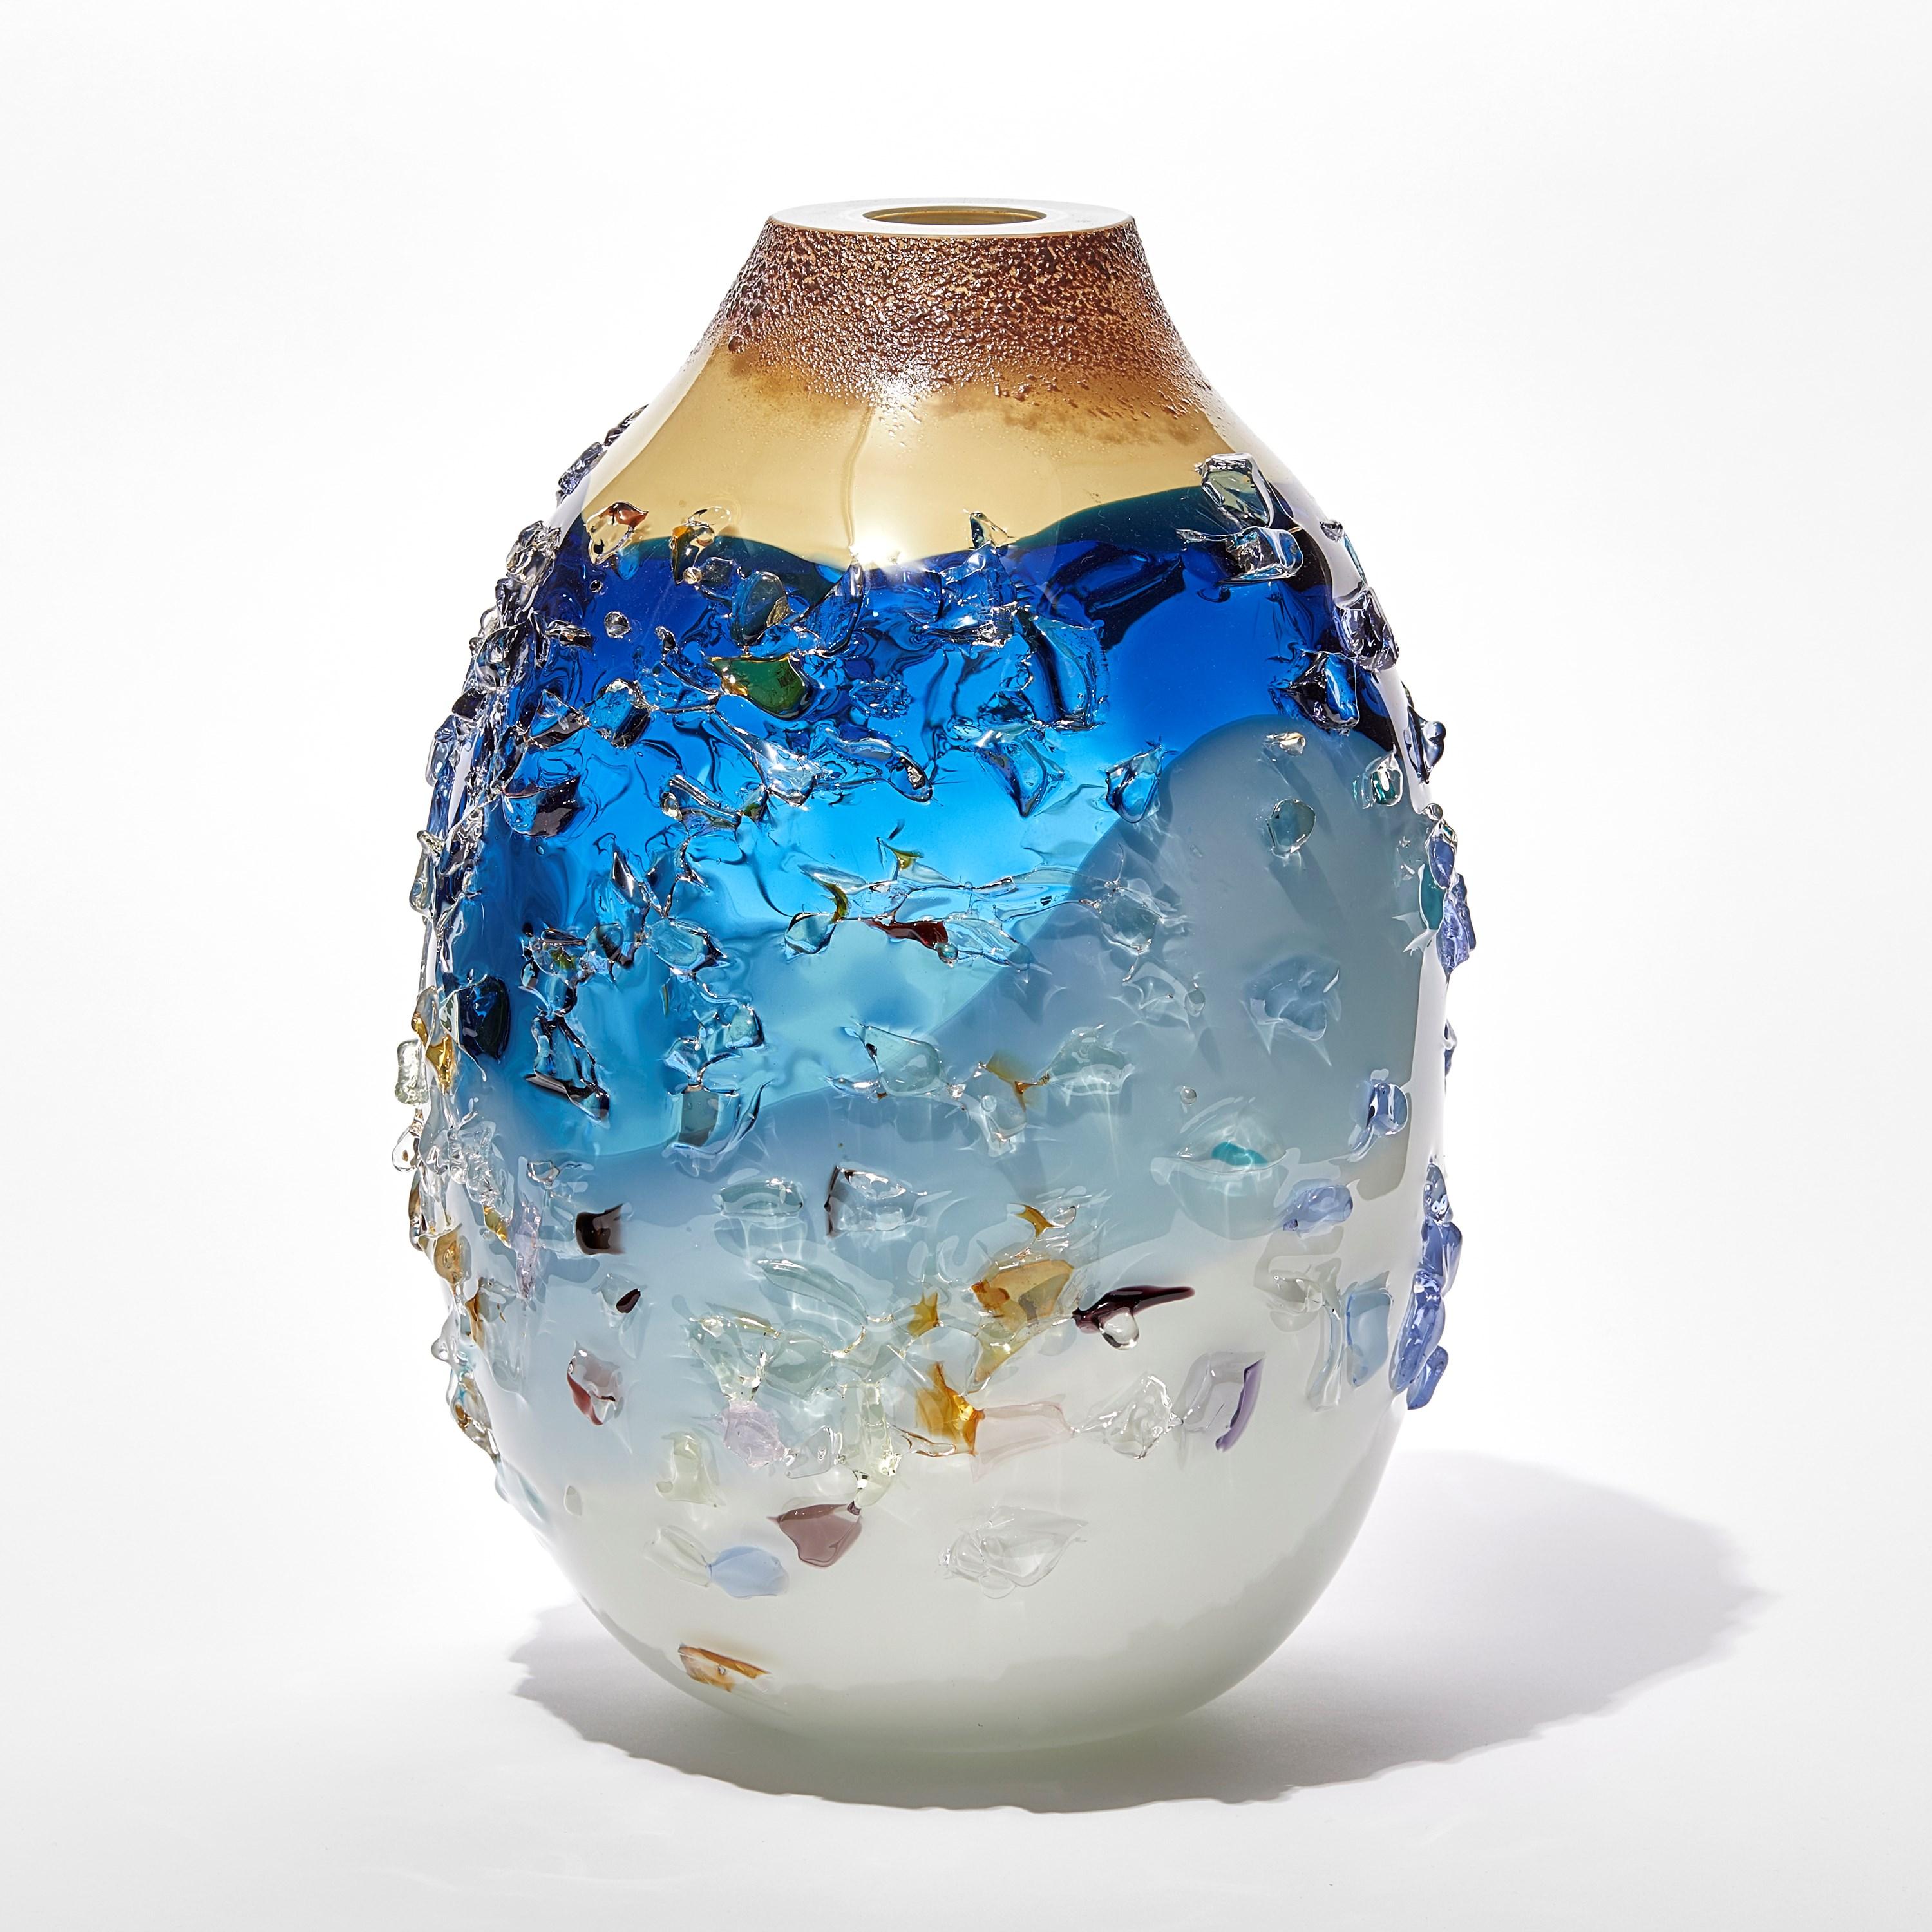 Sakura TFO23028 is a unique soft blue, aqua, cream and multicolored hand-blown art glass sculptural vase, covered in an organic glass shard adornment by the Dutch artist Maarten Vorlijk. The piece is flame polished to soften the edges of all the